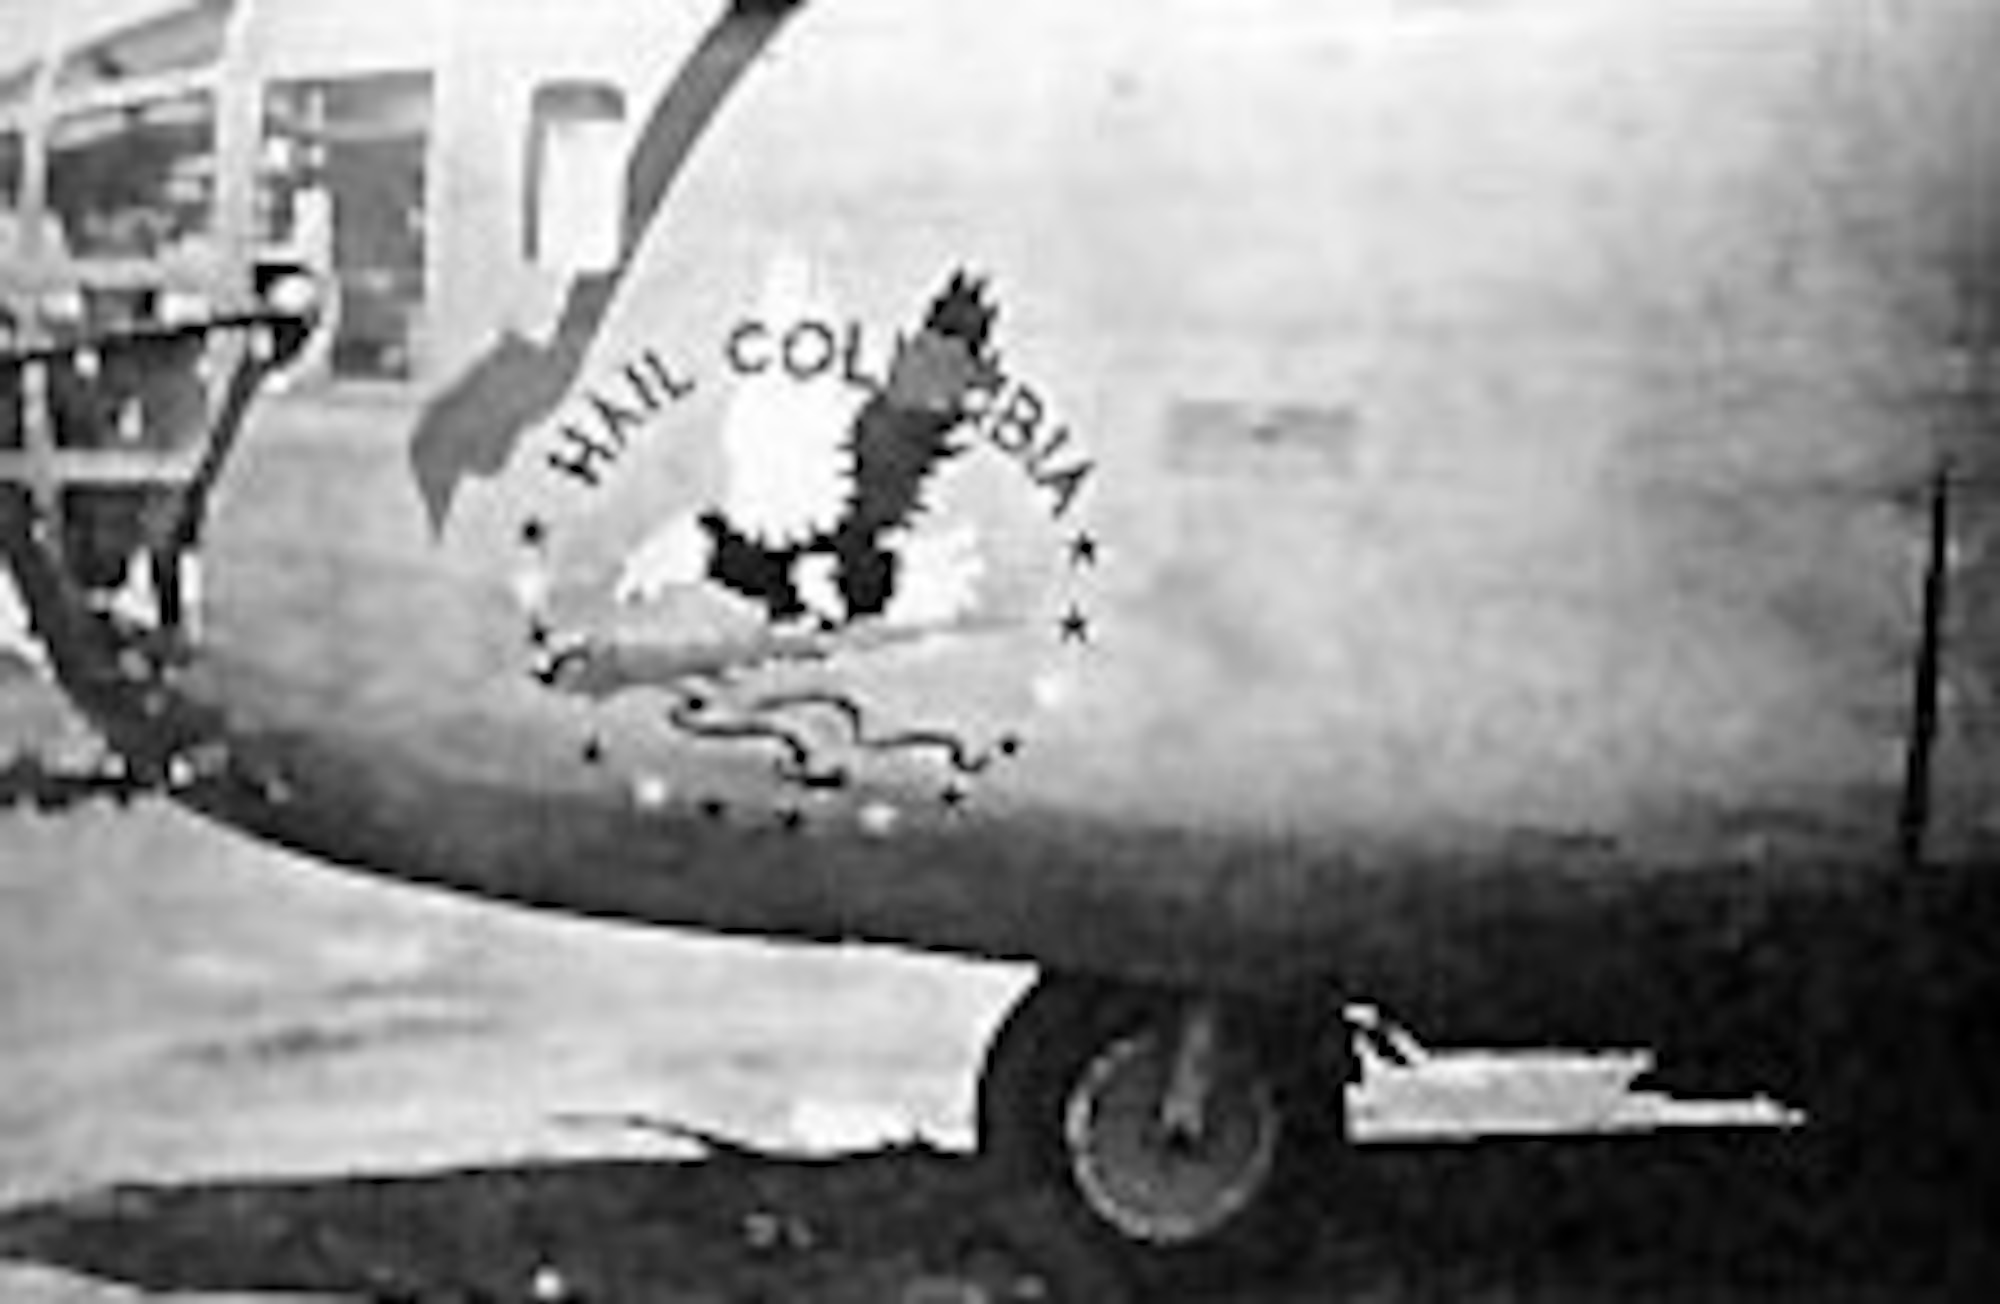 B-24 "Hail Columbia" flown by Col. John "Killer" Kane as lead bomber for the 98th Bomb Group on the Ploesti Mission. (U.S. Air Force photo)